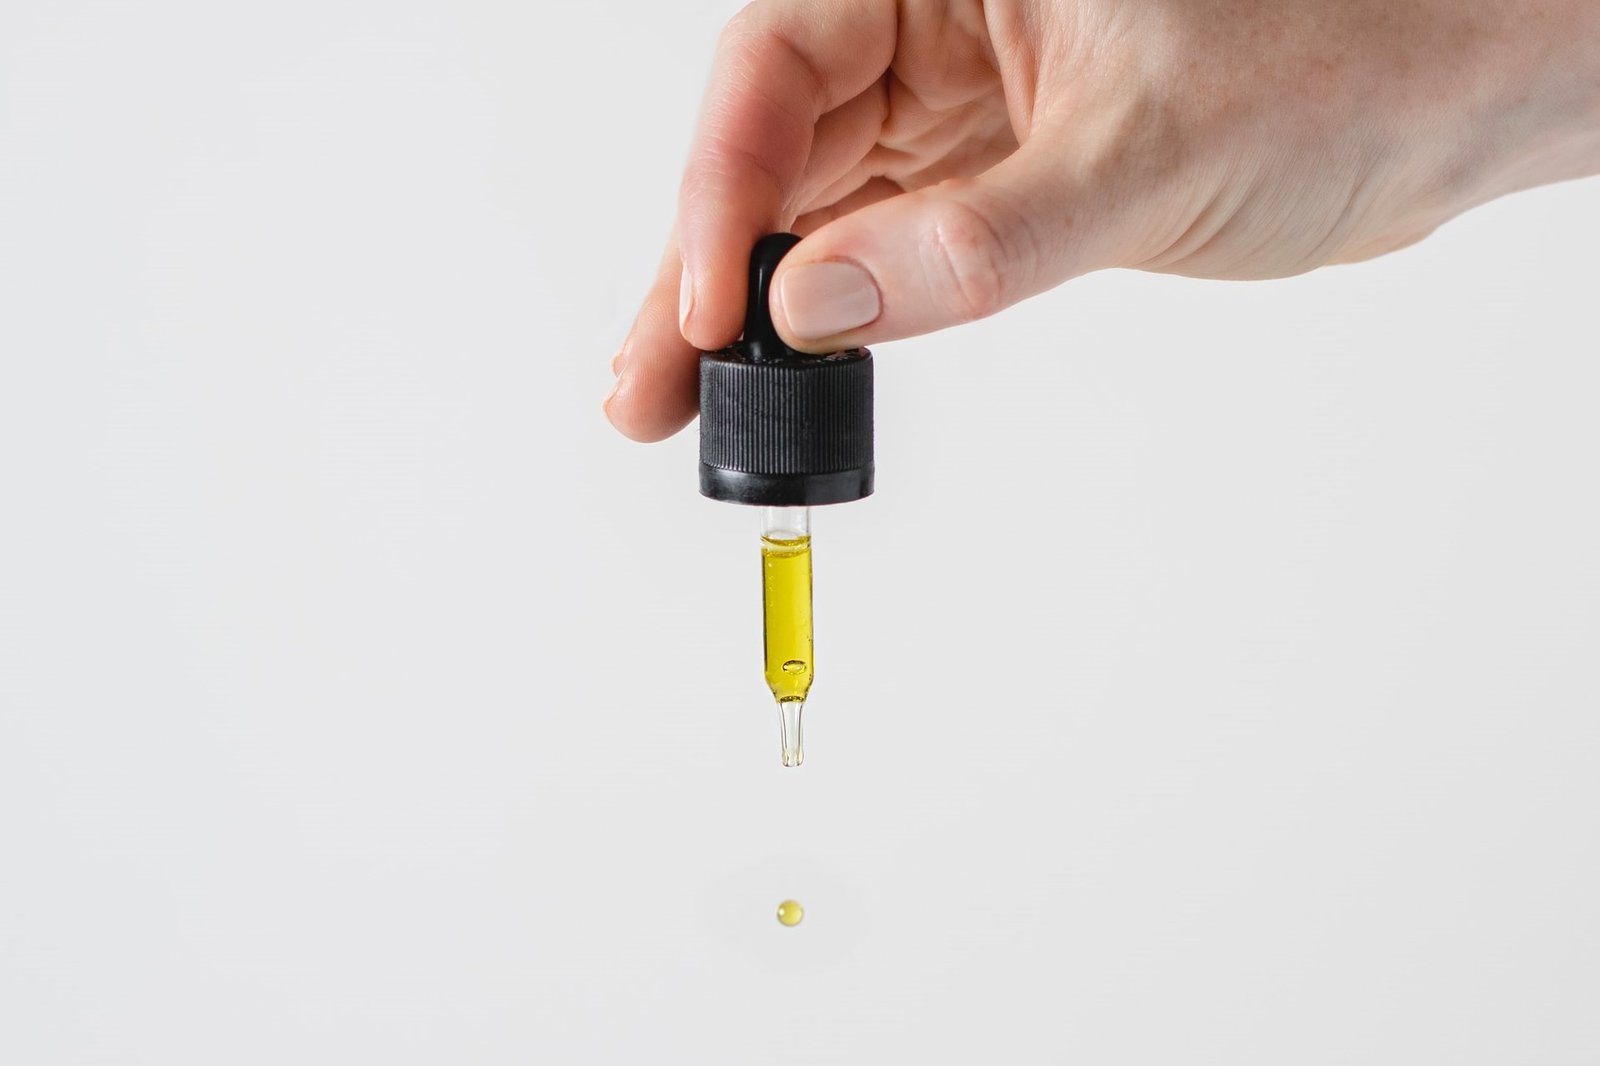 Low Dose CBD Sold Over Counter but How Exactly Does It Work?